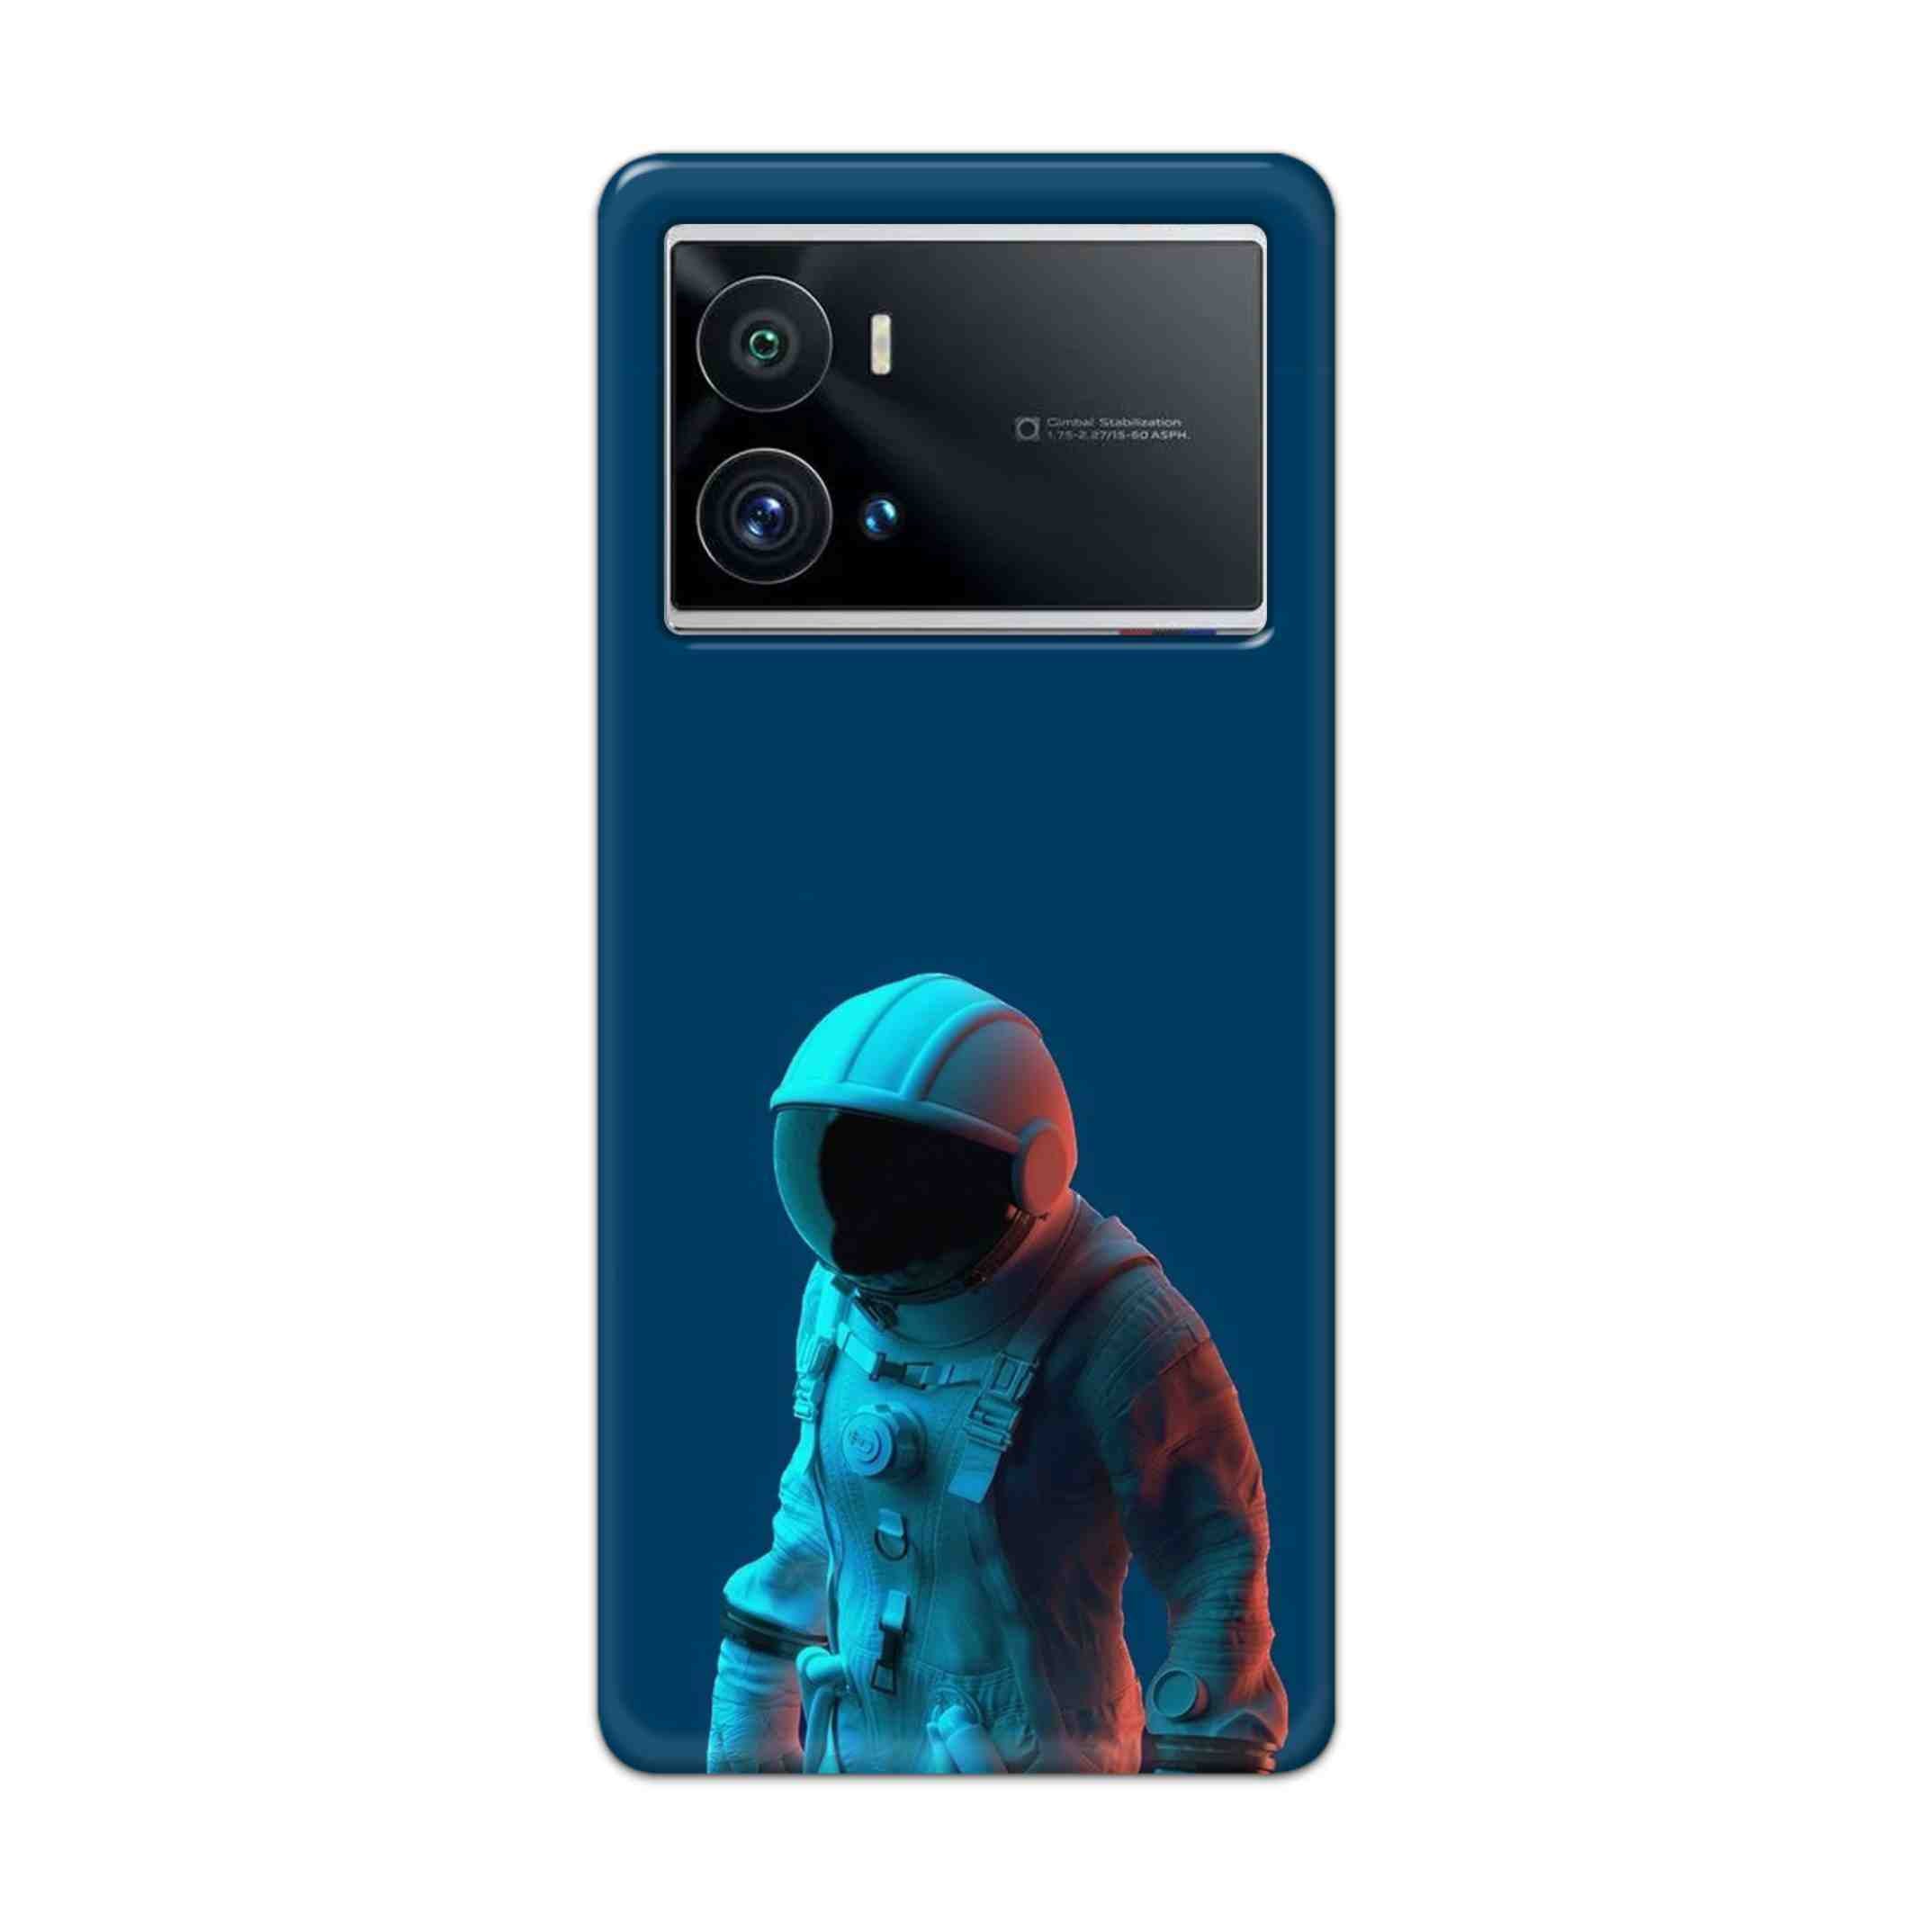 Buy Blue Astronaut Hard Back Mobile Phone Case Cover For iQOO 9 Pro 5G Online